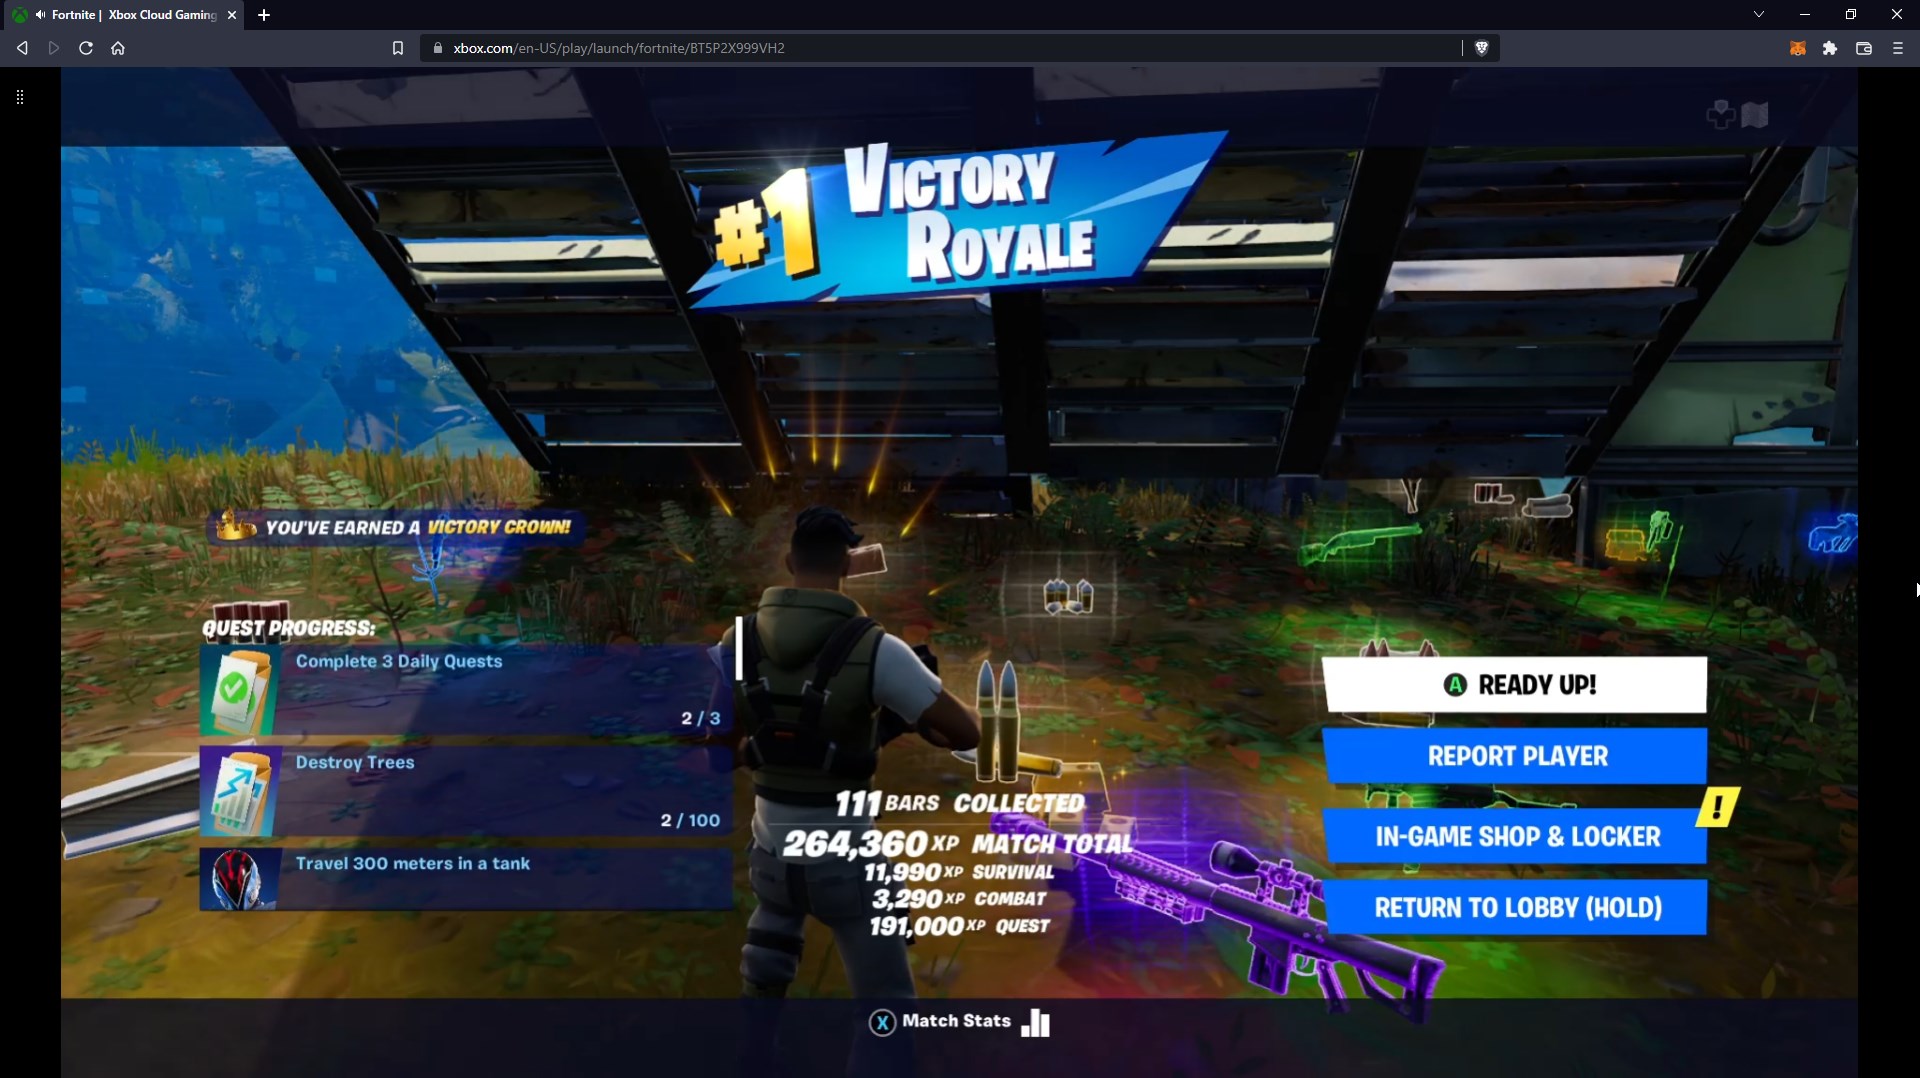 jin on X: You can play Fortnite right now in your WEB browser for free, no  install + no build mode so no excuses - it's a must play game:   btw